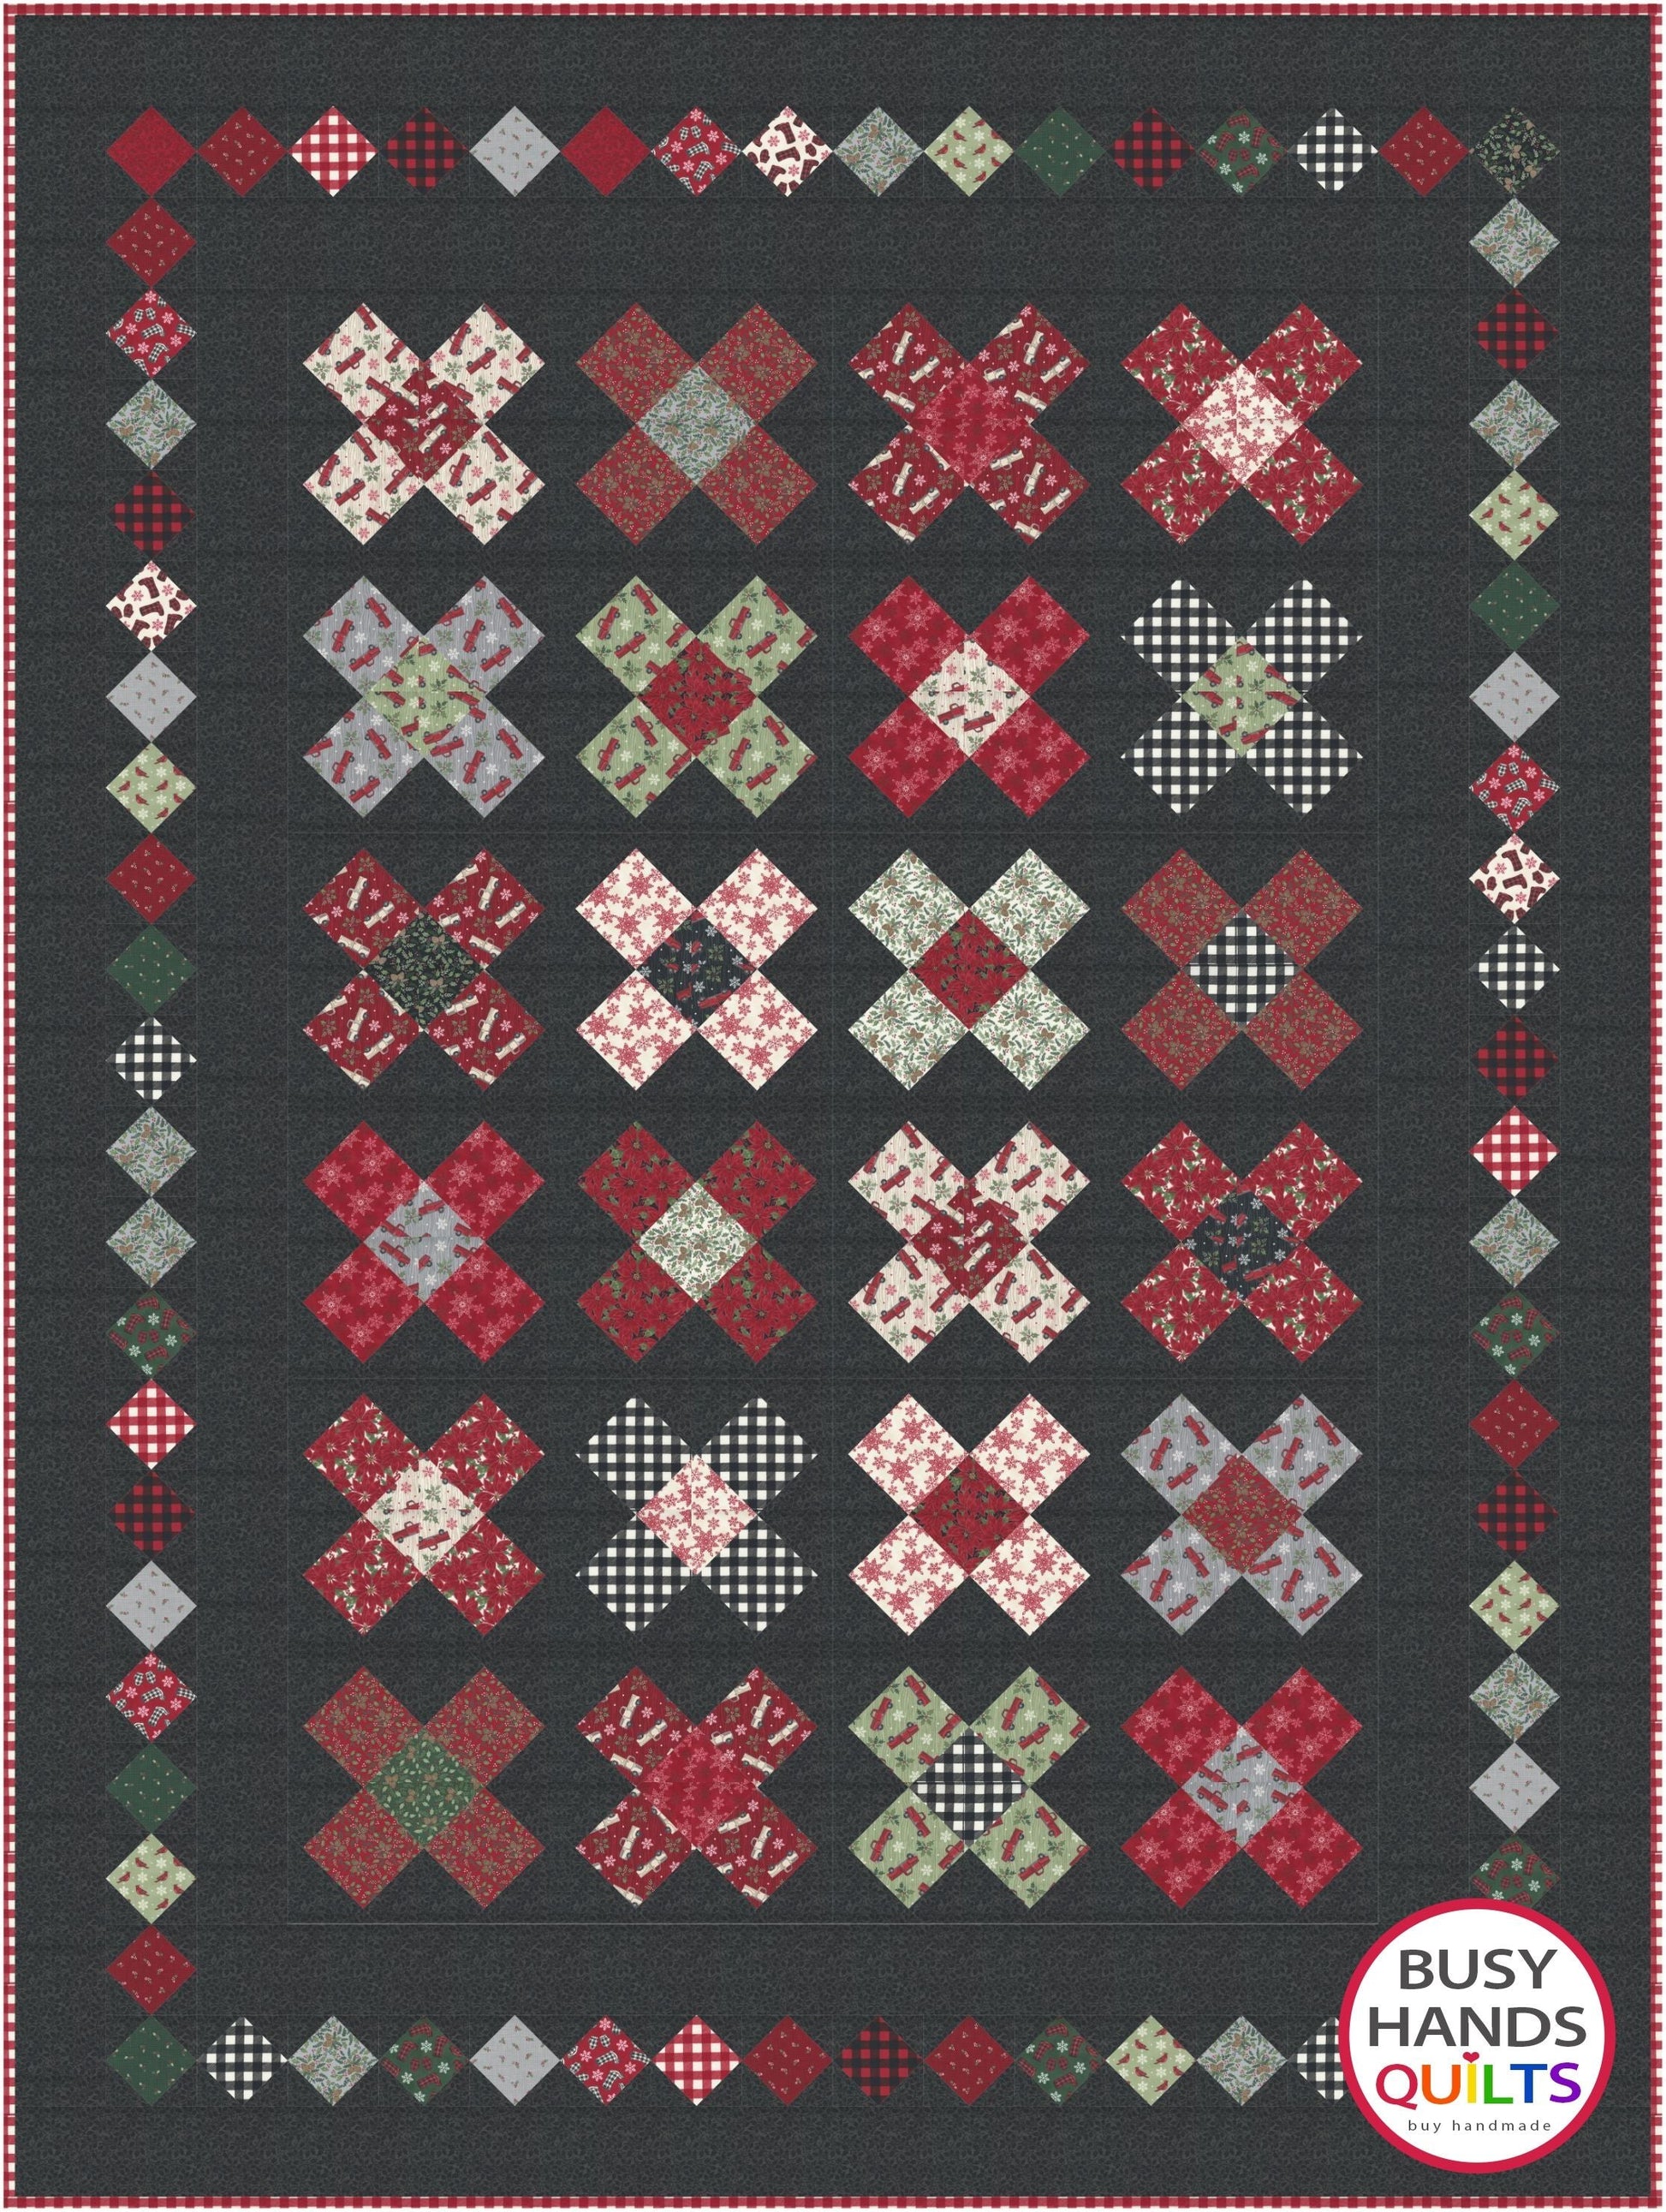 Belle Quilt Pattern PRINTED Busy Hands Quilts {$price}